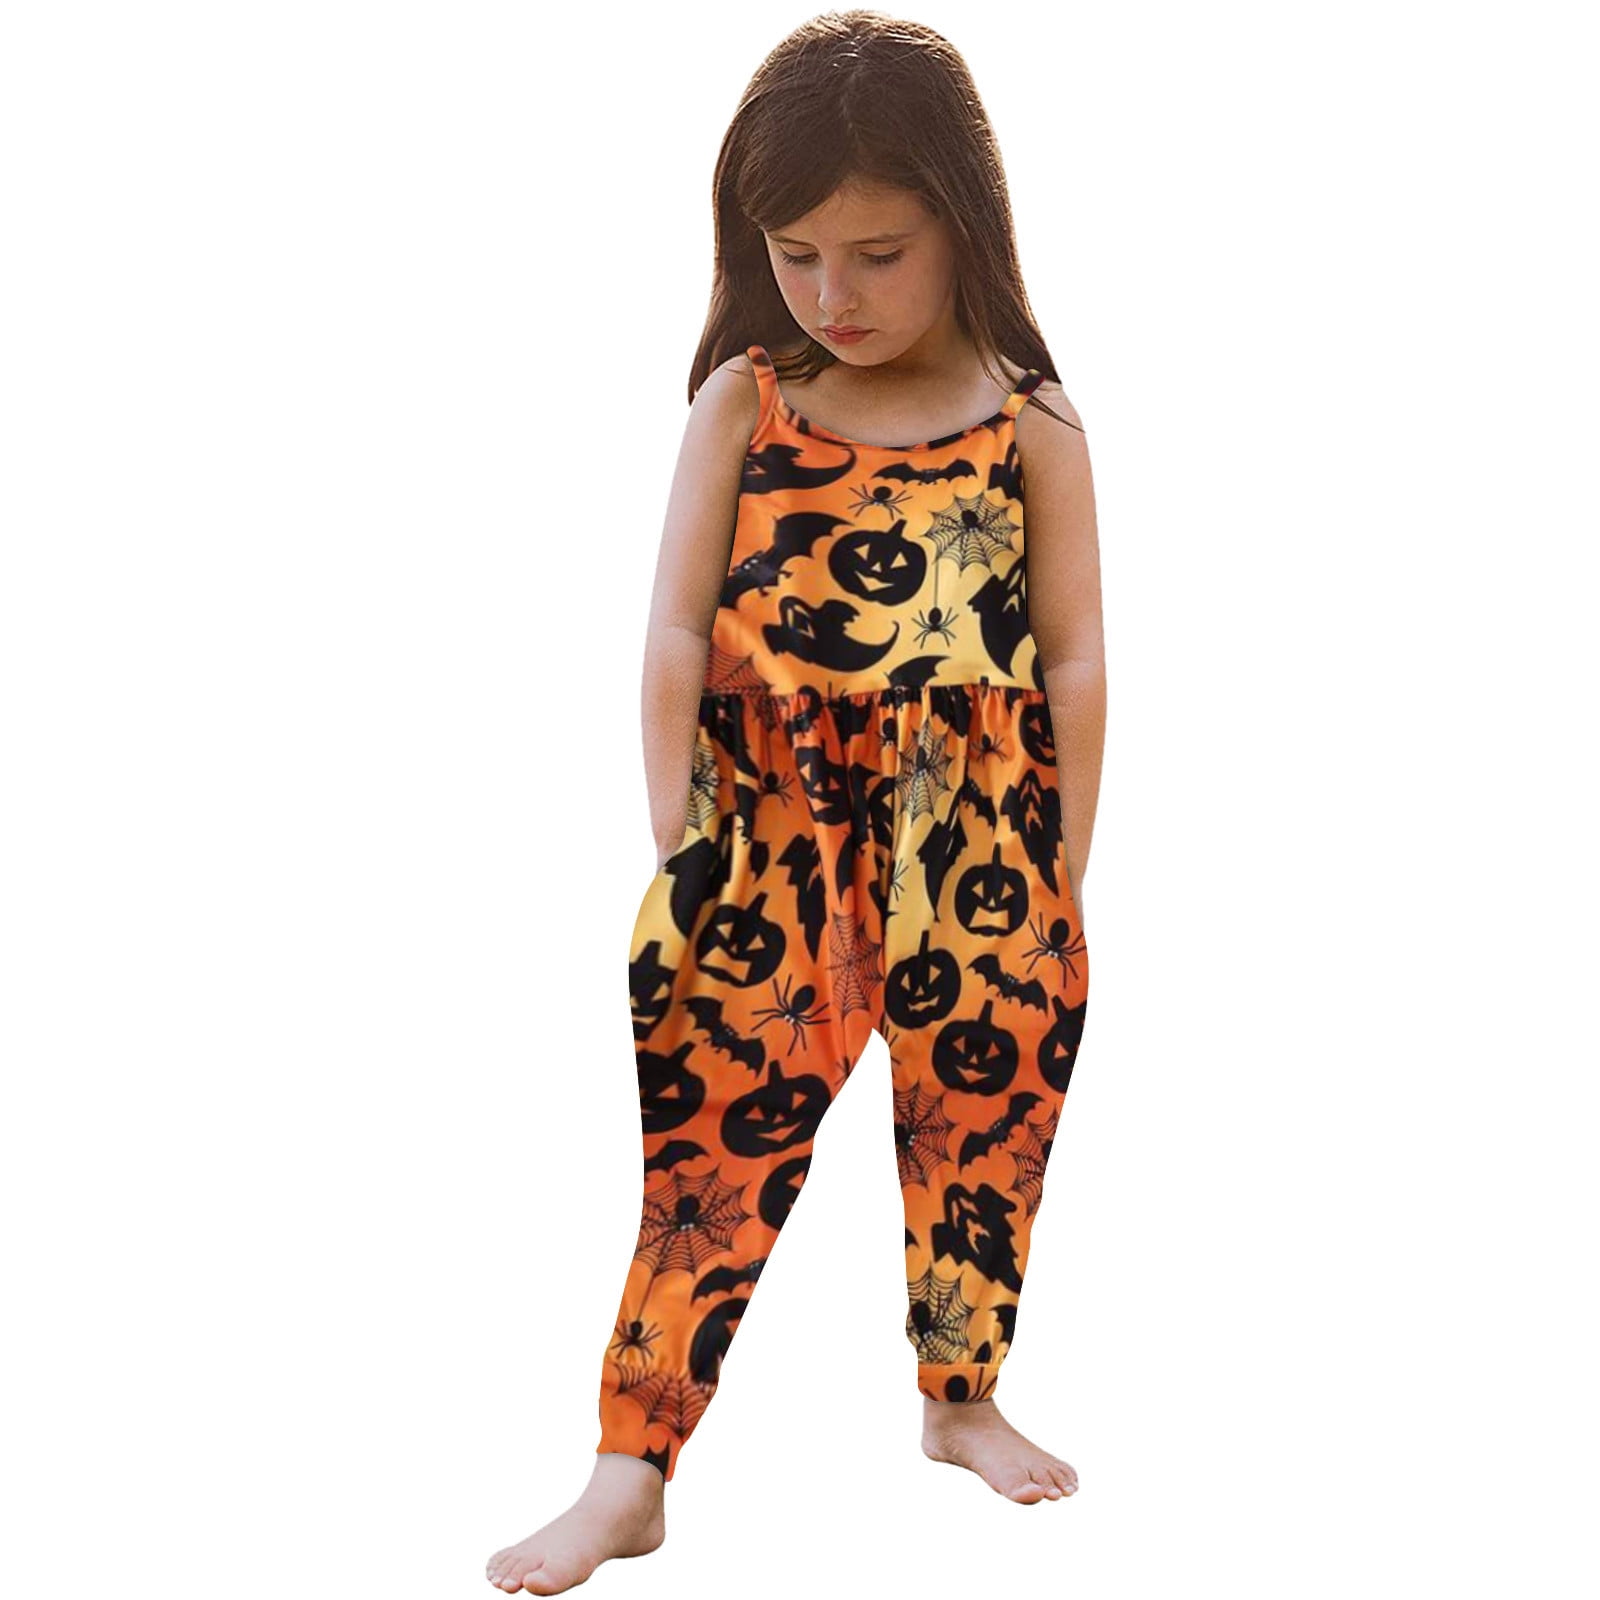 Baby Girls Jumpsuit Halloween Pumpkin Printed Strap Romper Outfits Toddler Harem Pants with Pockets 1-6 Years 